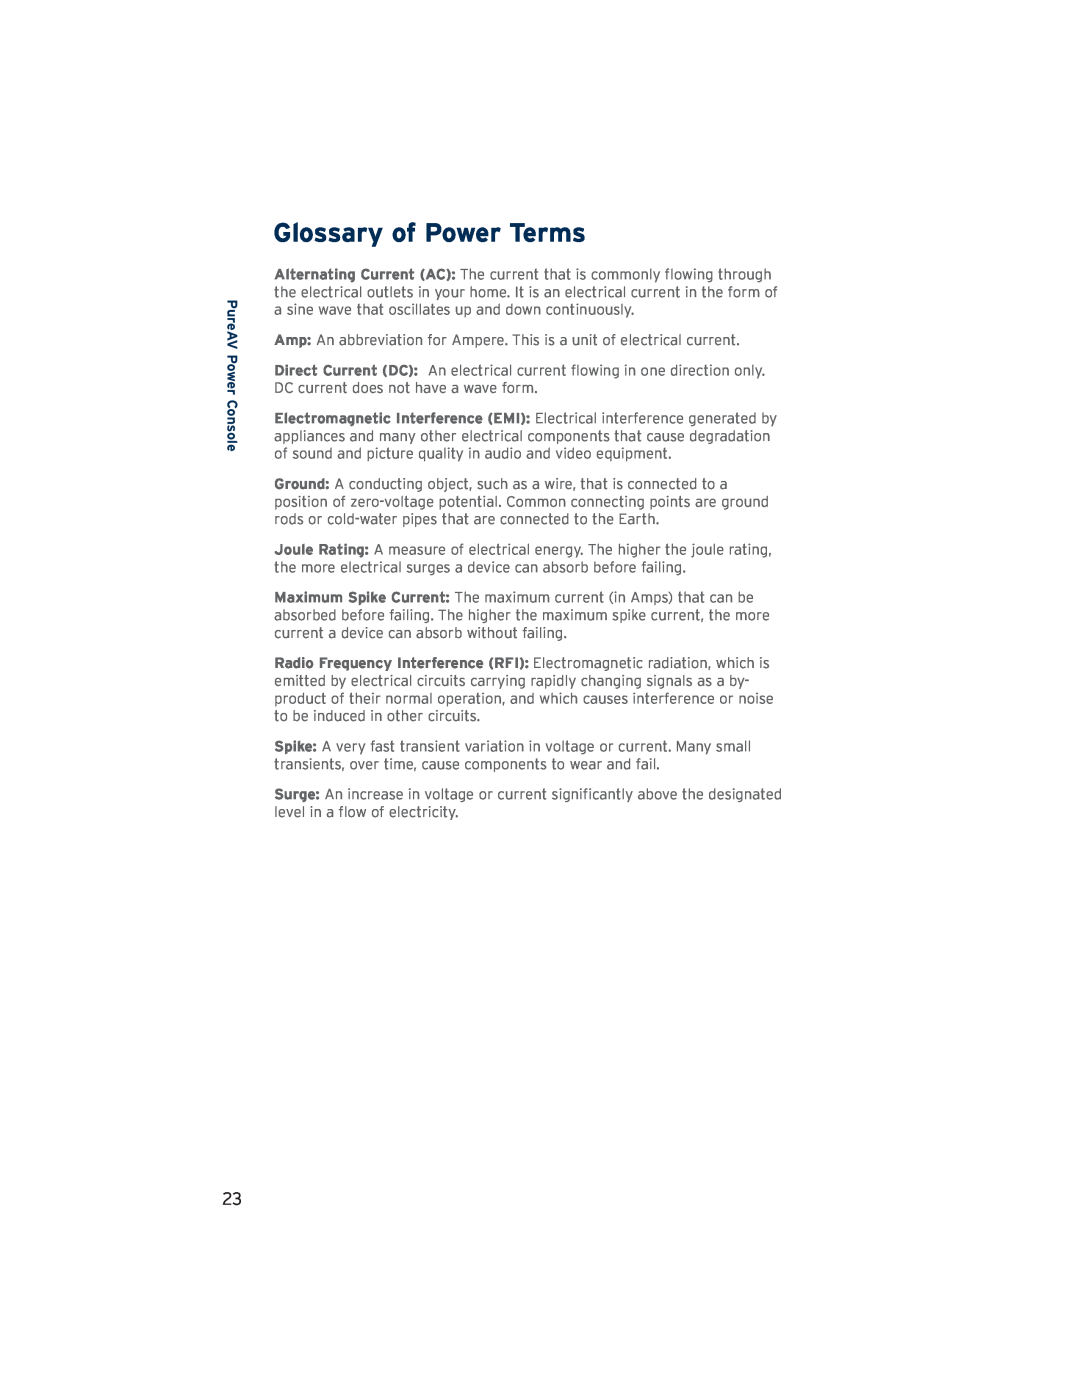 Belkin PF60, AP41300-12 user manual Glossary of Power Terms, PureAV Power Console 